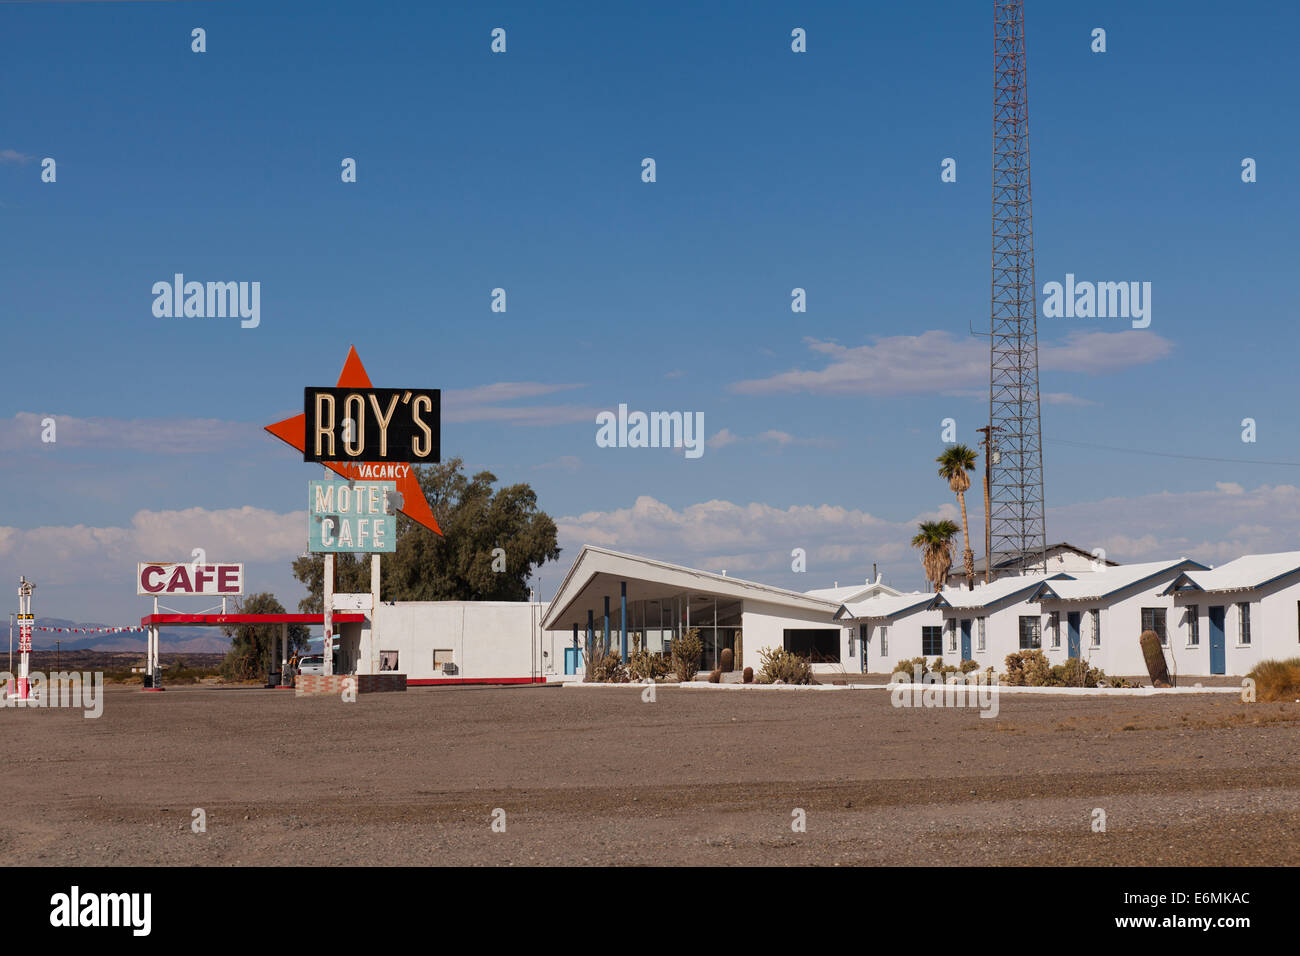 Roy's diner on Historic Route 66 - Amboy, California USA Stock Photo